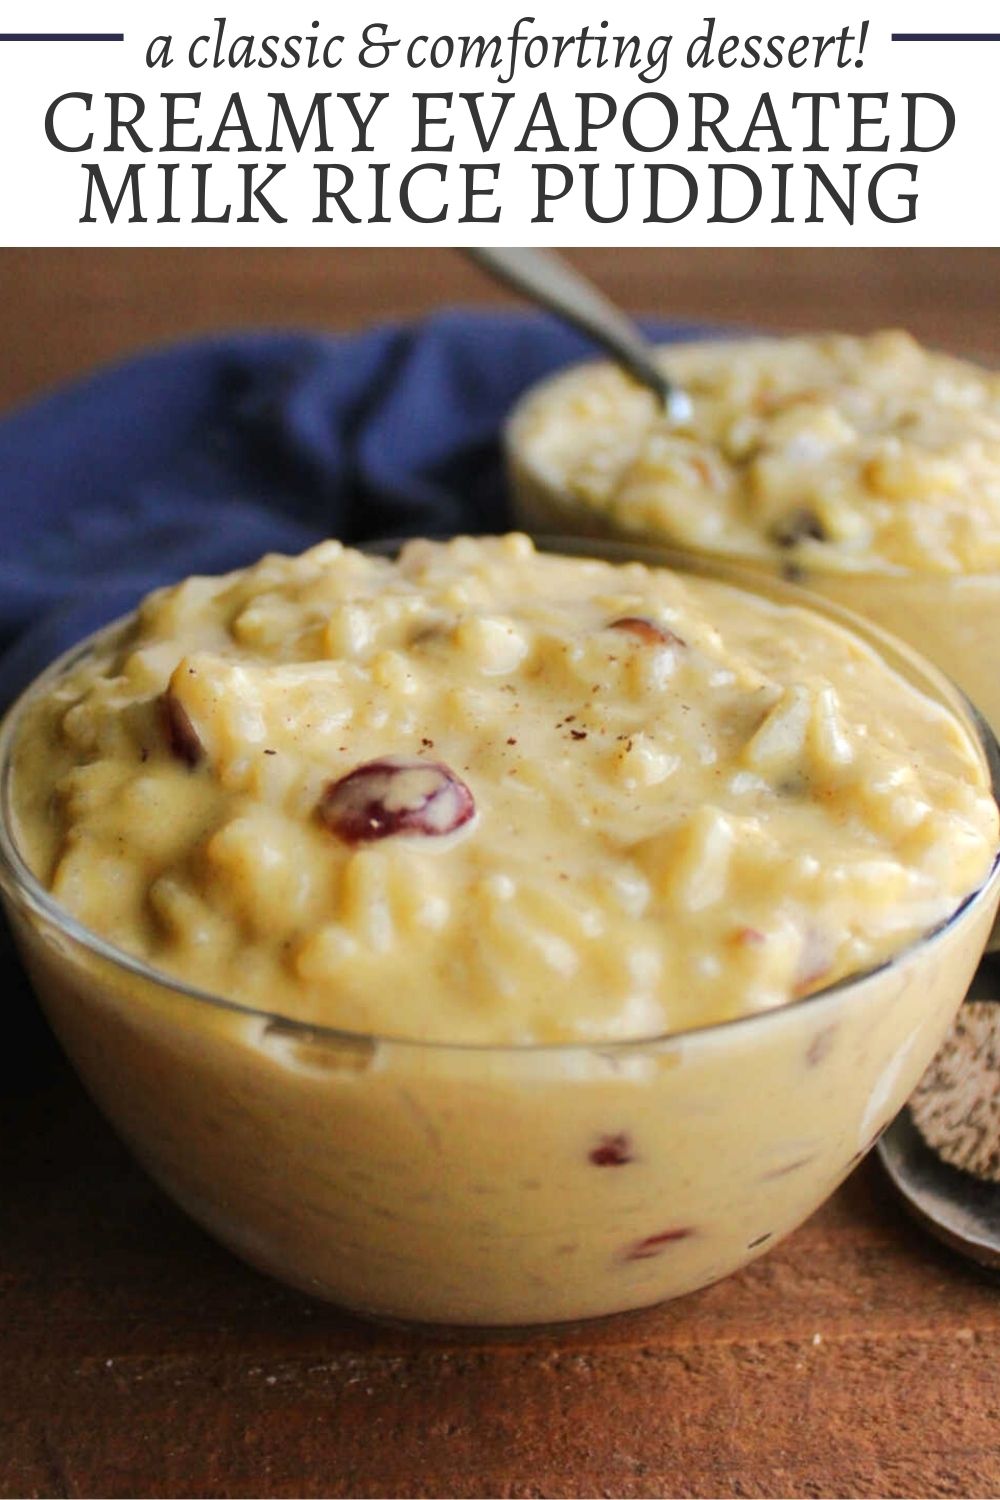 Any leftover rice pudding can be stored in the refrigerator for up to four days. If you want to enjoy the leftovers warm just add a splash of milk and heat it in the microwave until it is heated through.